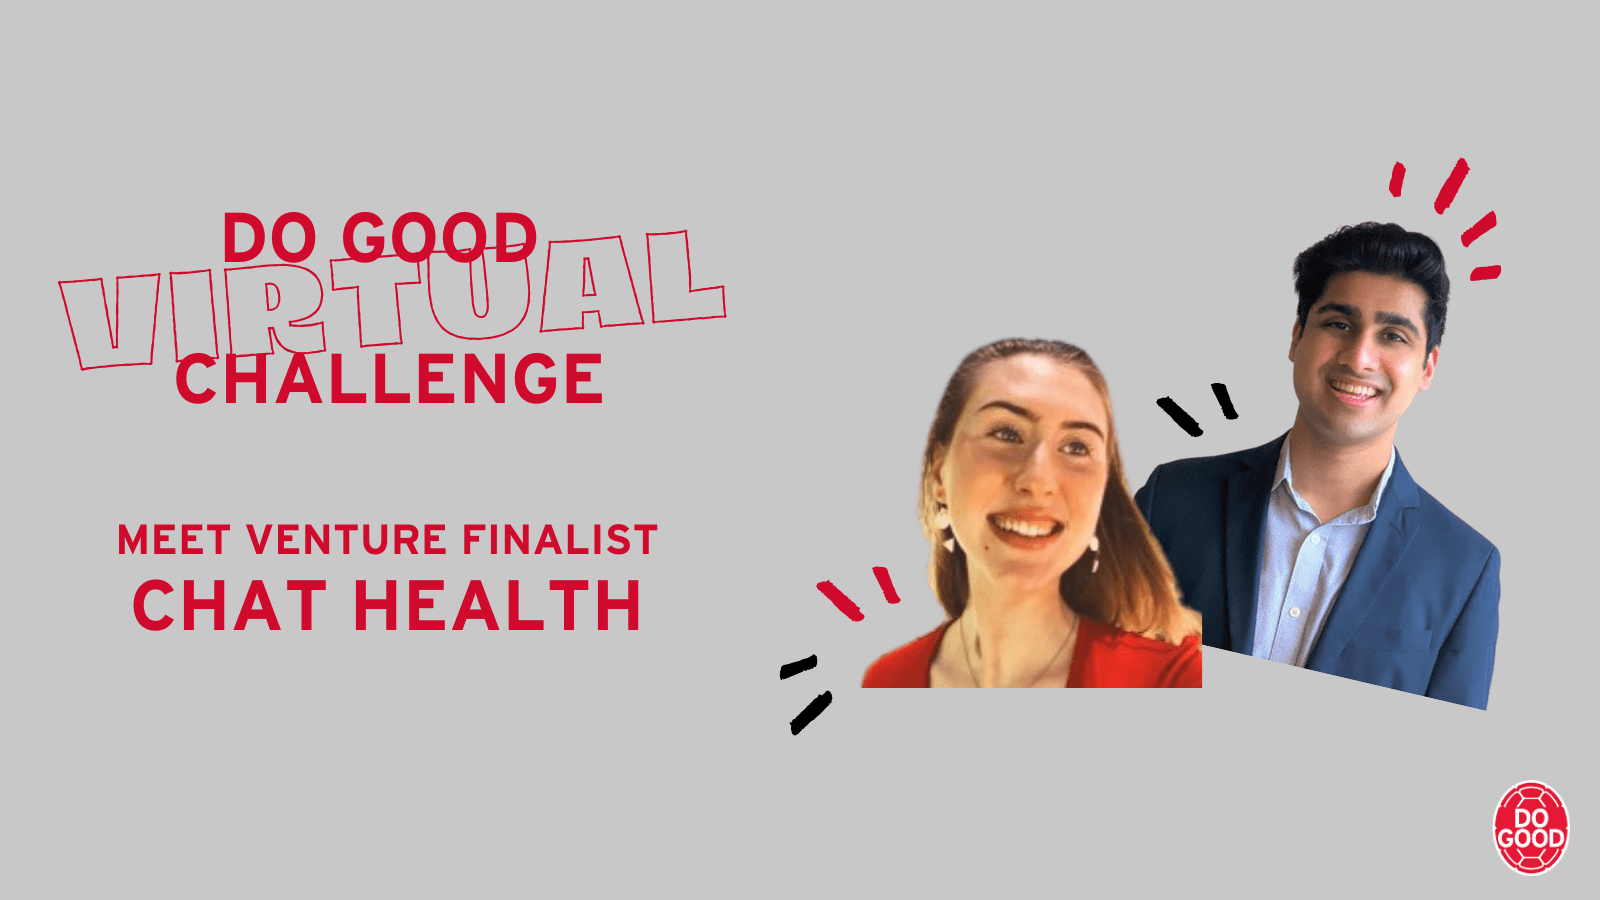 Do Good Challenge 2021 Finalist Chat Health from the University of Maryland